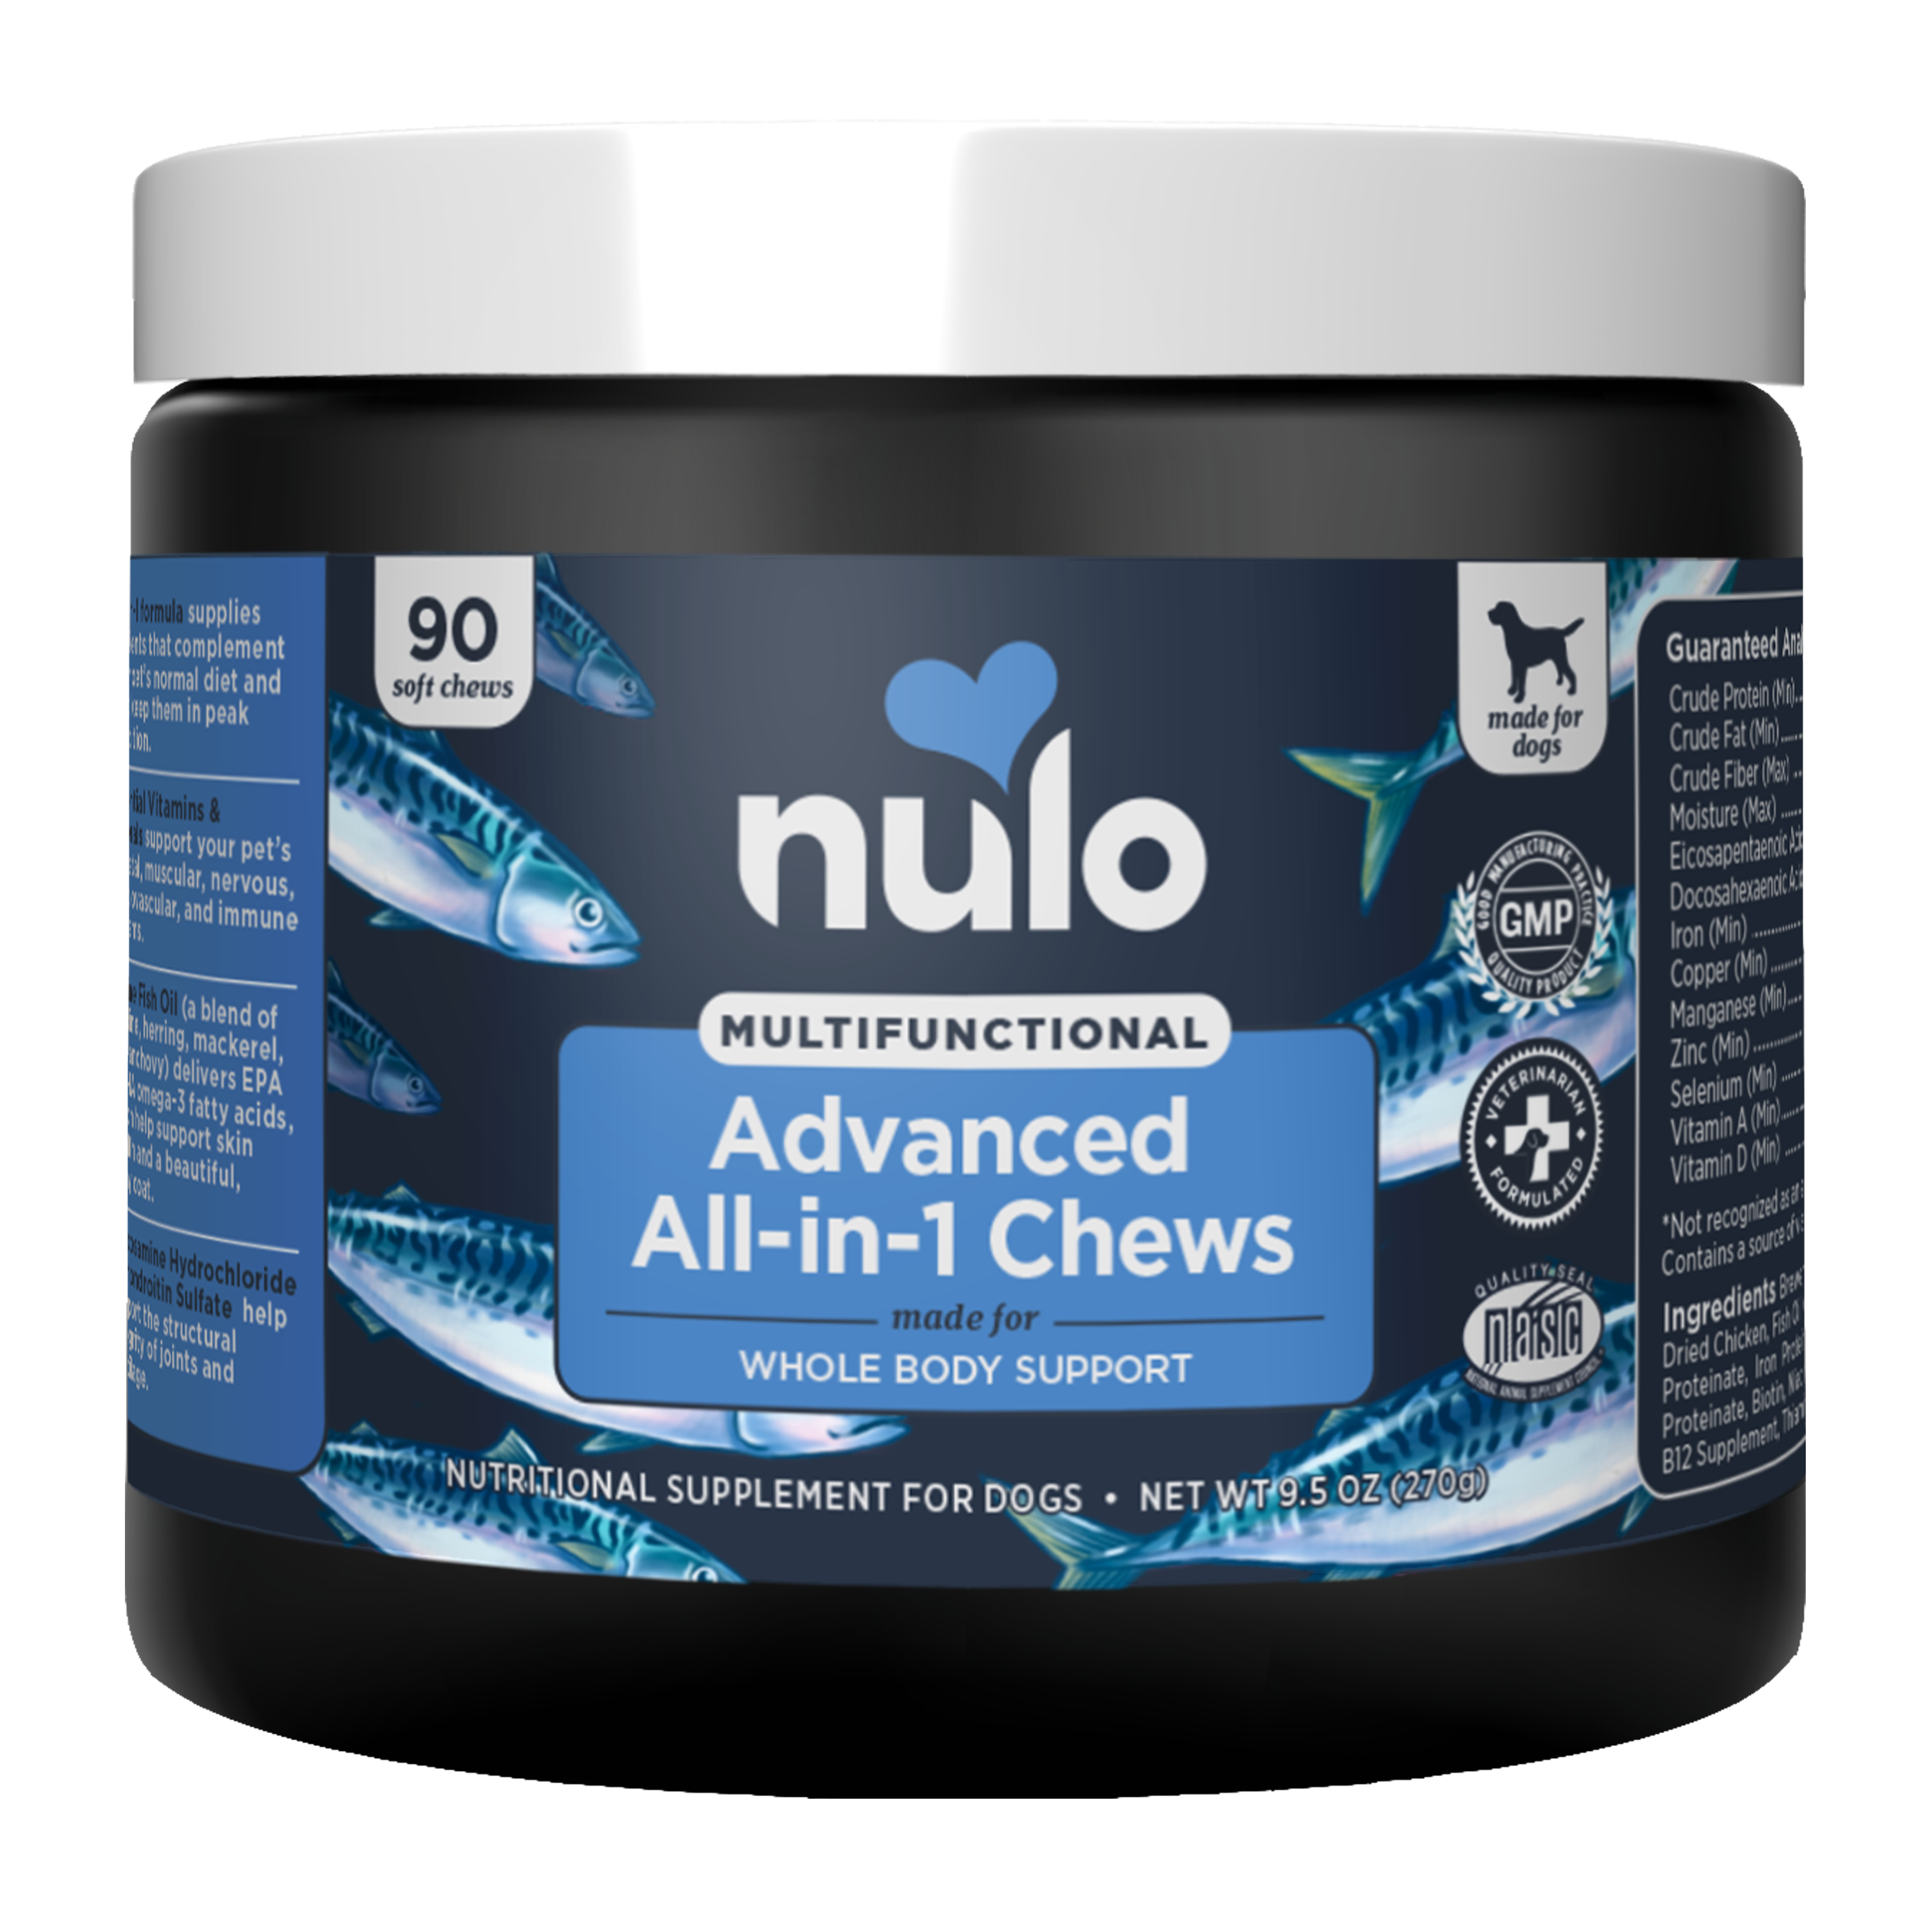 NU_Dog_Functional Soft Chews_All-in-1_9.5oz_FRONT